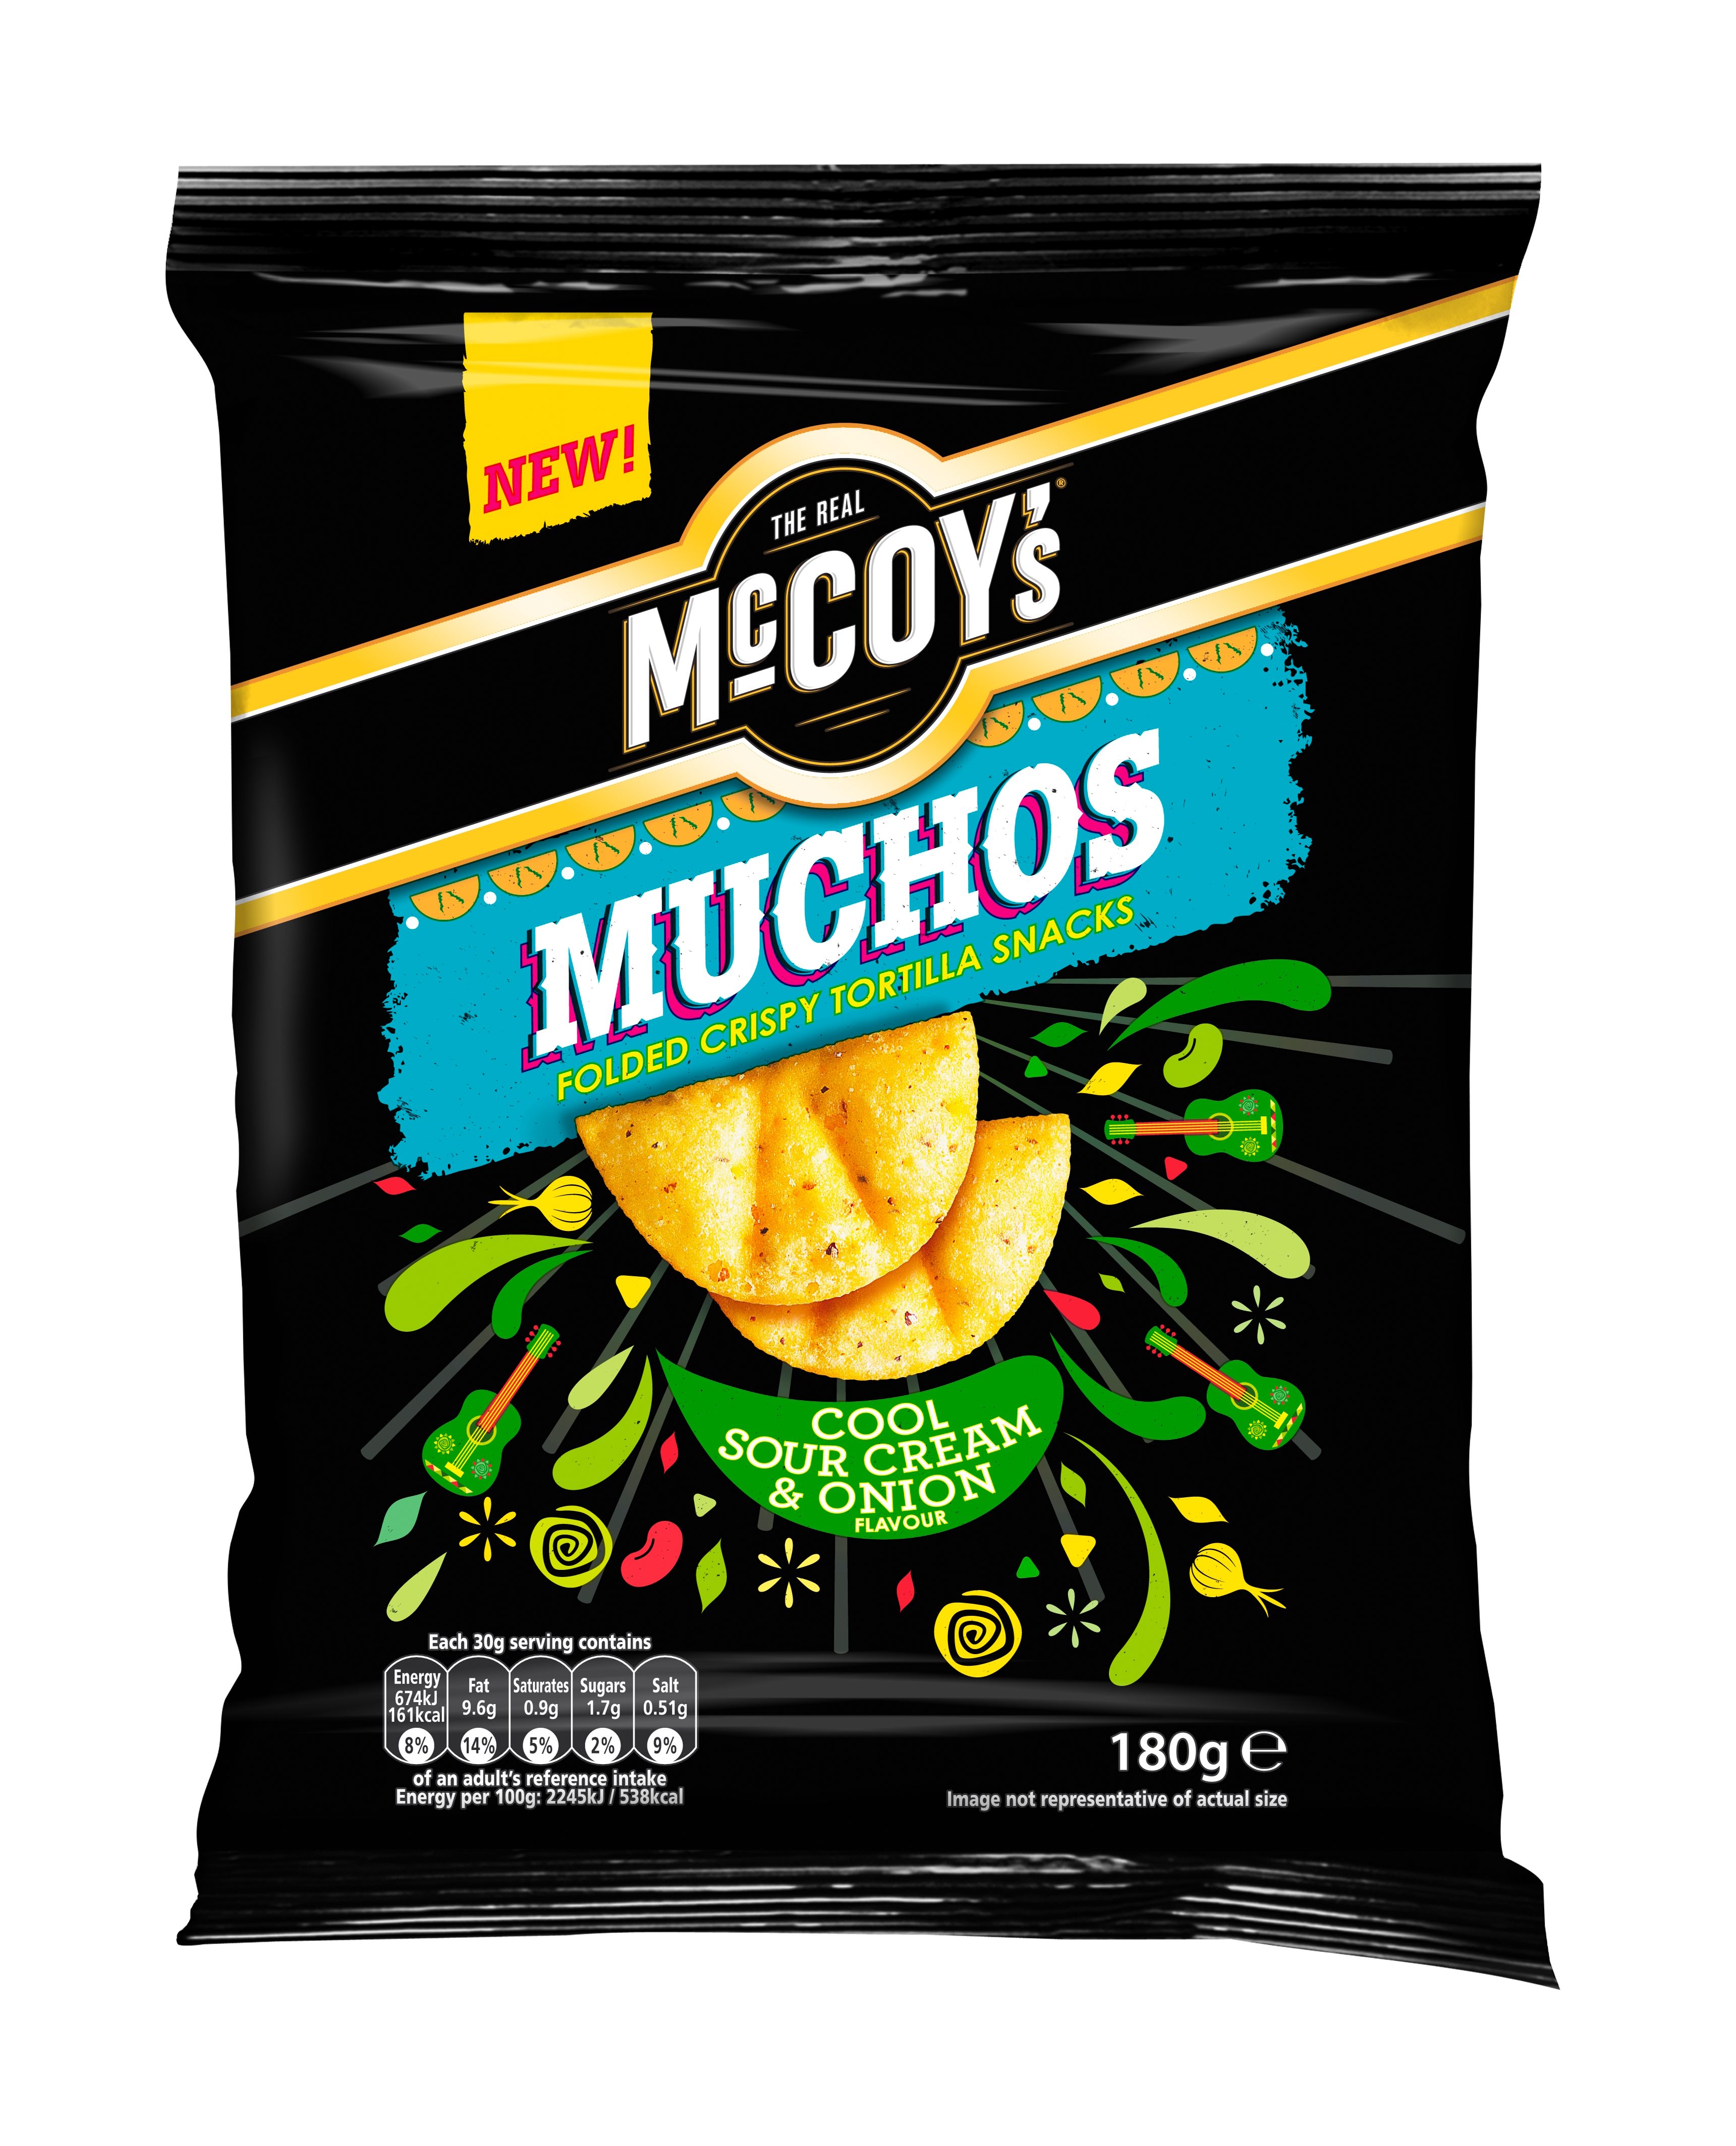 Mccoy’s Muchos back on TV with £1m investment